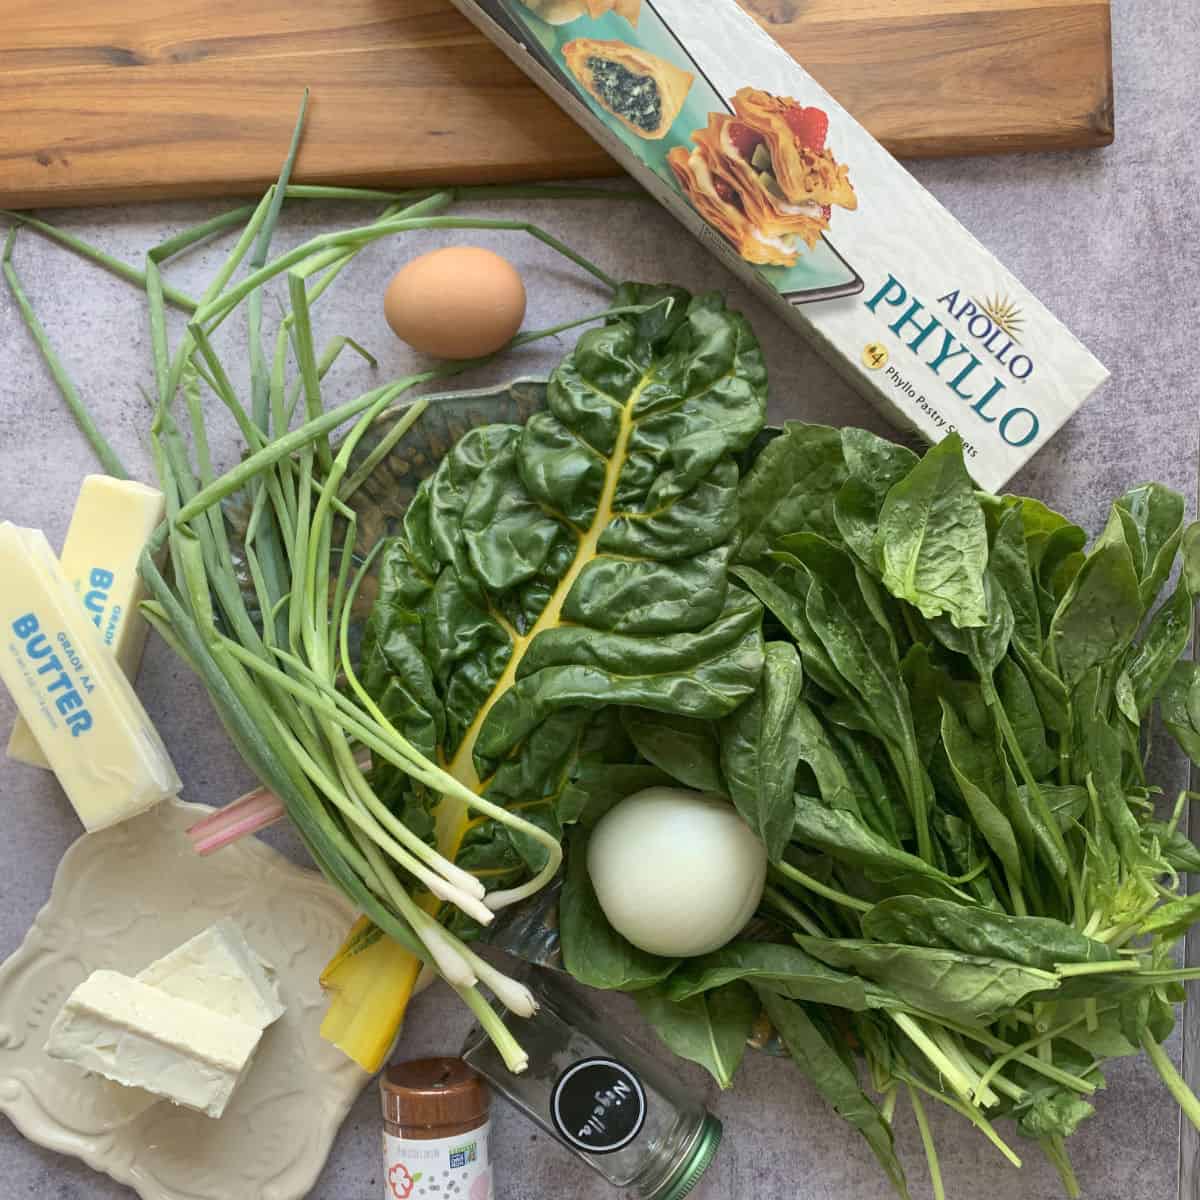 Package of phyllo dough, spinach, chard, butter, feta and other ingredients. 